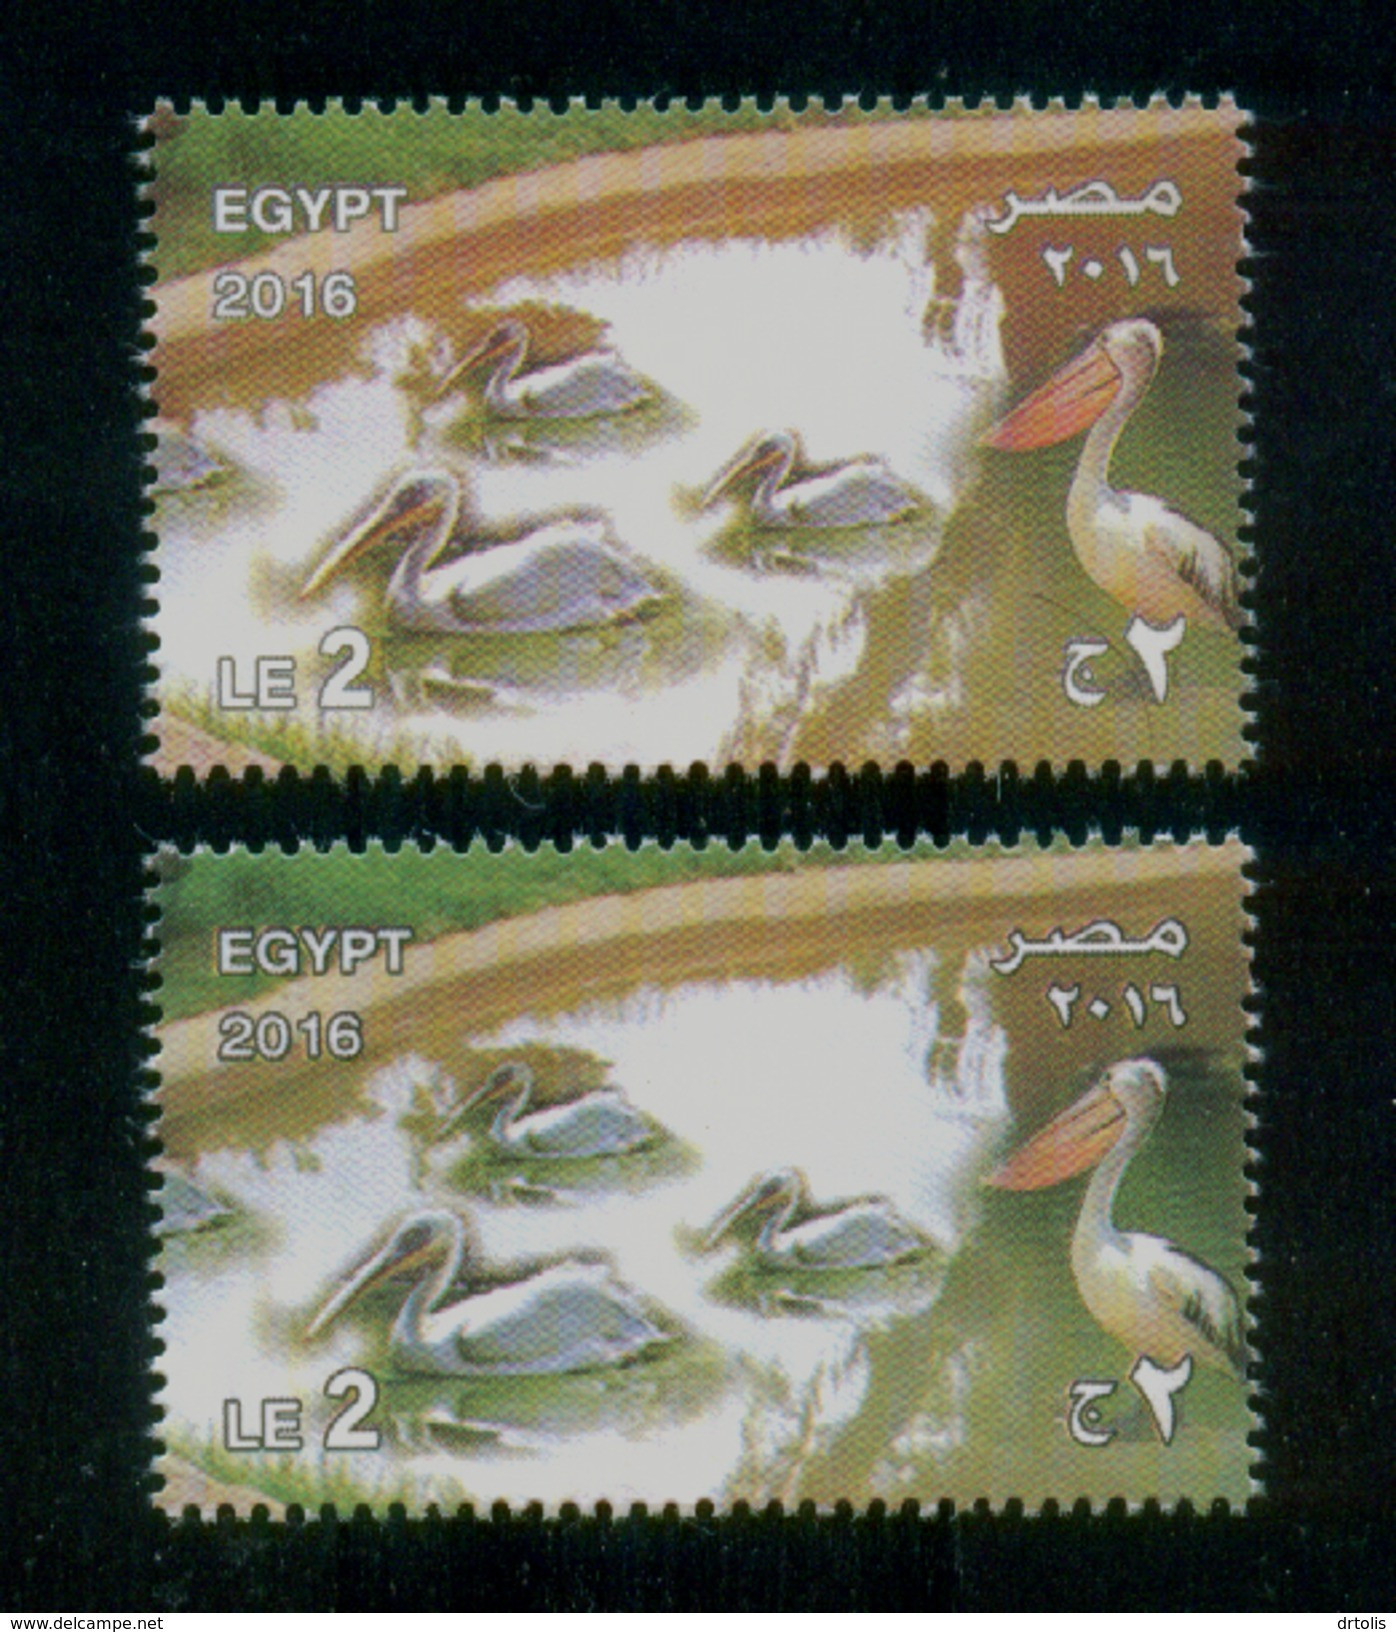 EGYPT / 2016 / GIZA ZOO ; 125 YEARS / BIRDS / PELICAN  / RARE COLOR VARIETY / MNH / VF - Ungebraucht